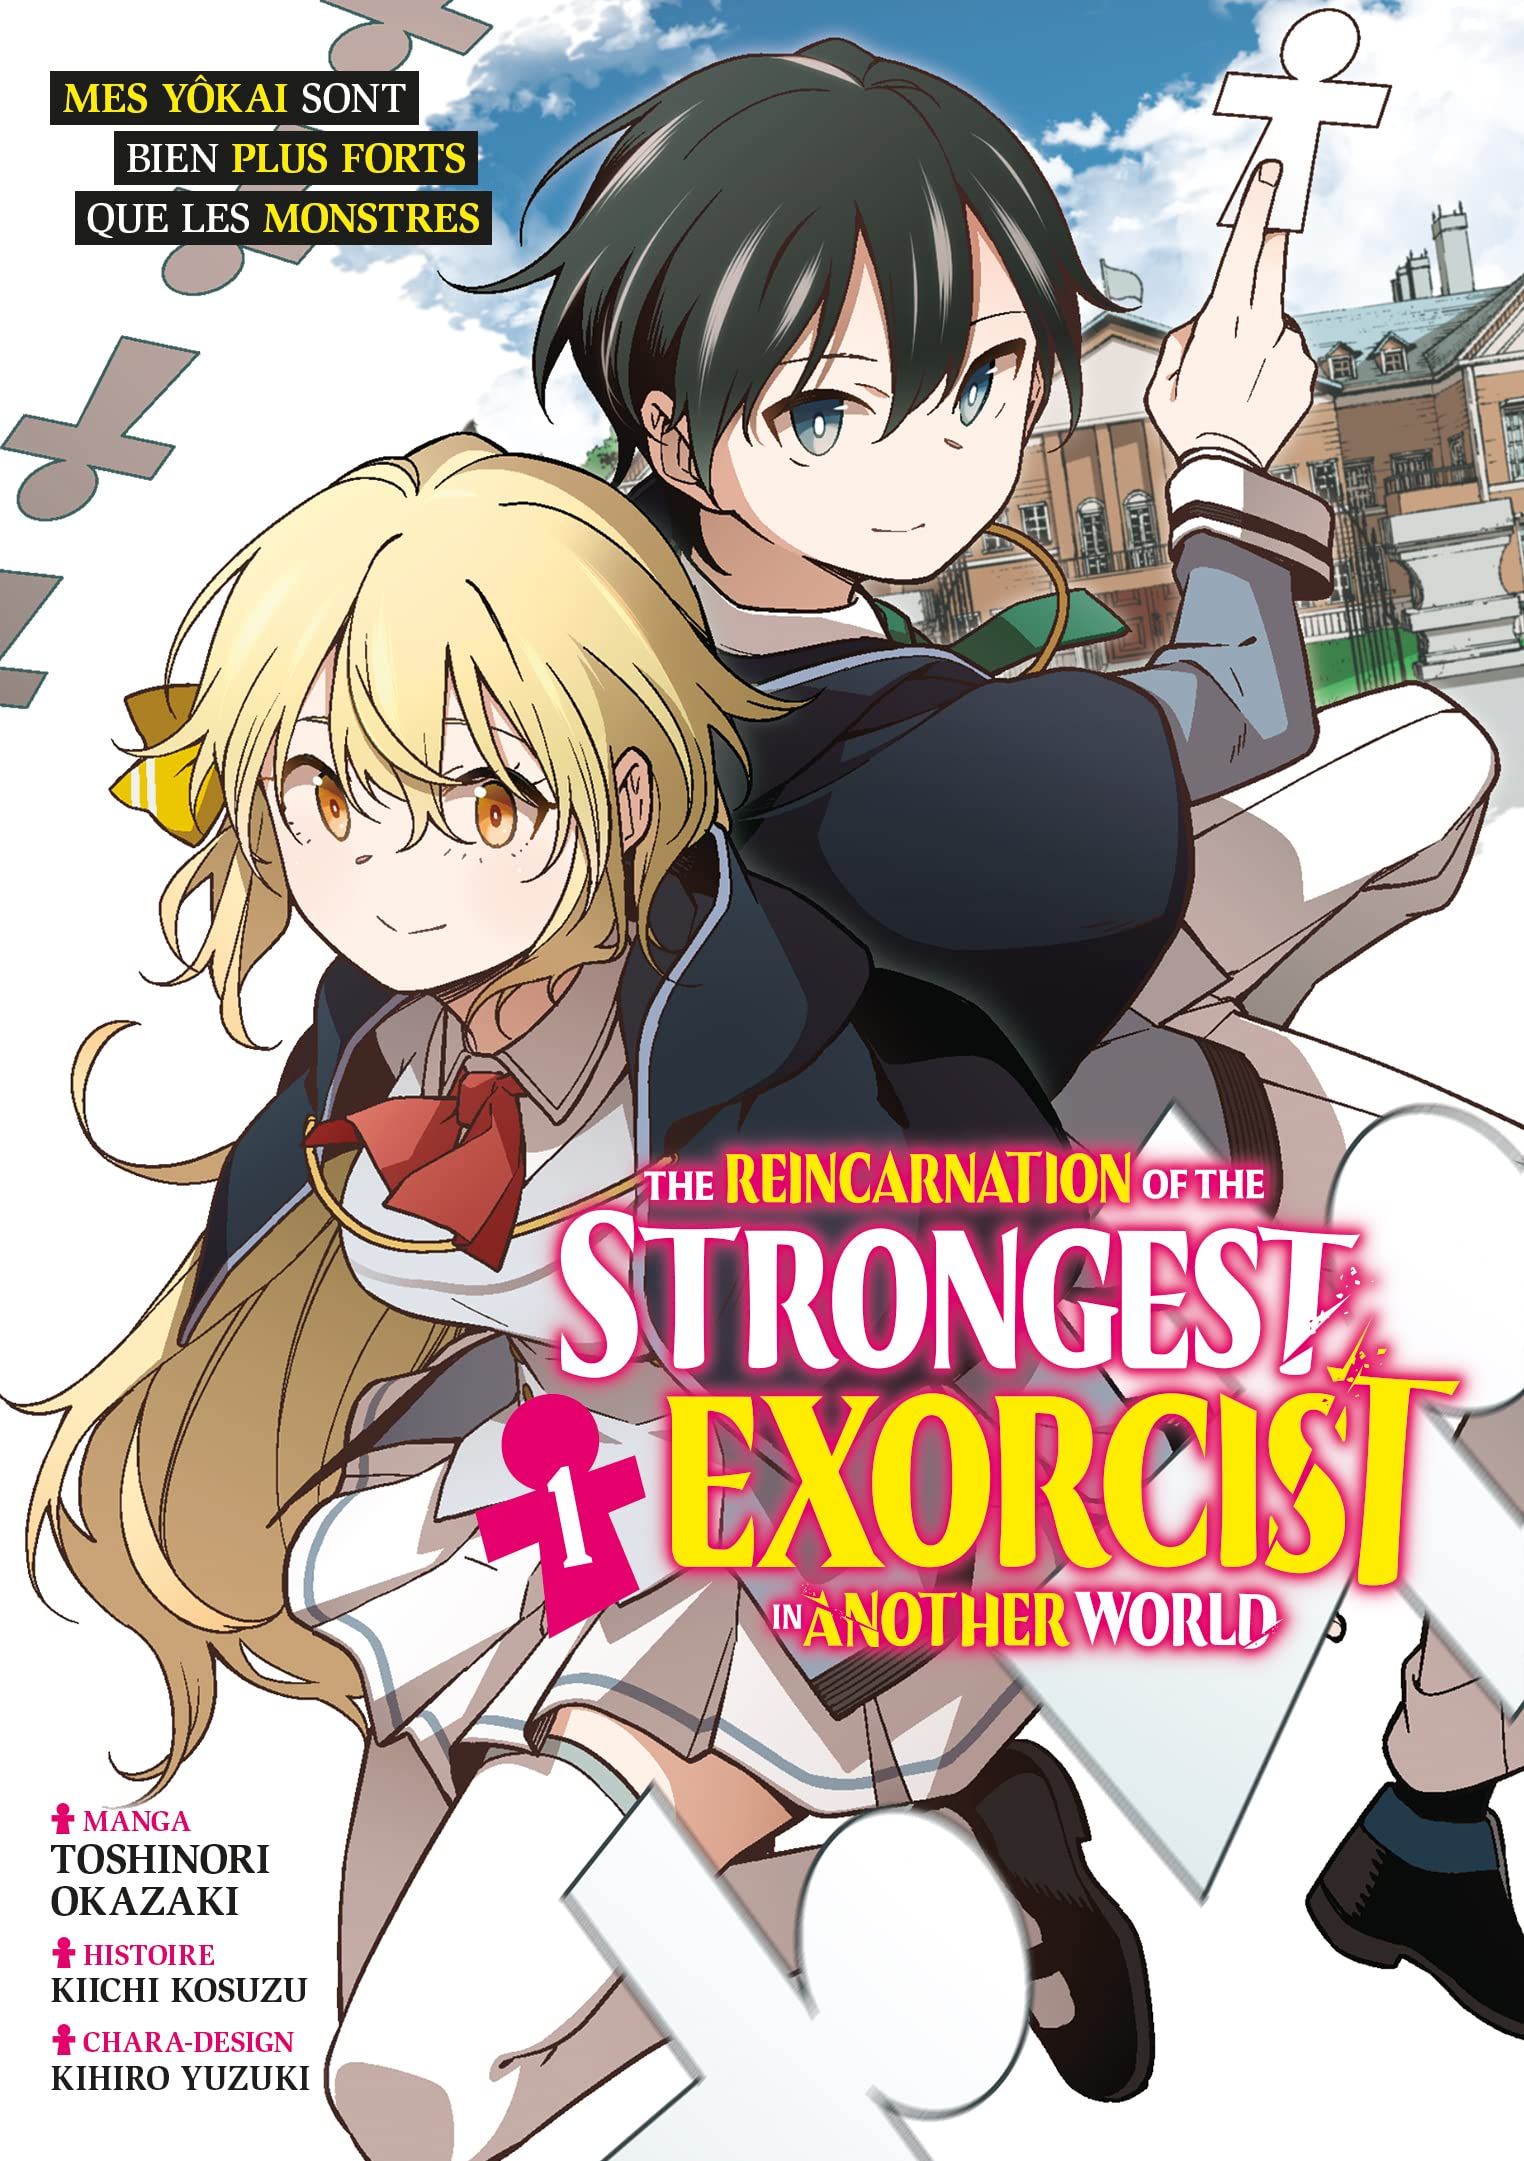 Watch The Reincarnation of the Strongest Exorcist in Another World